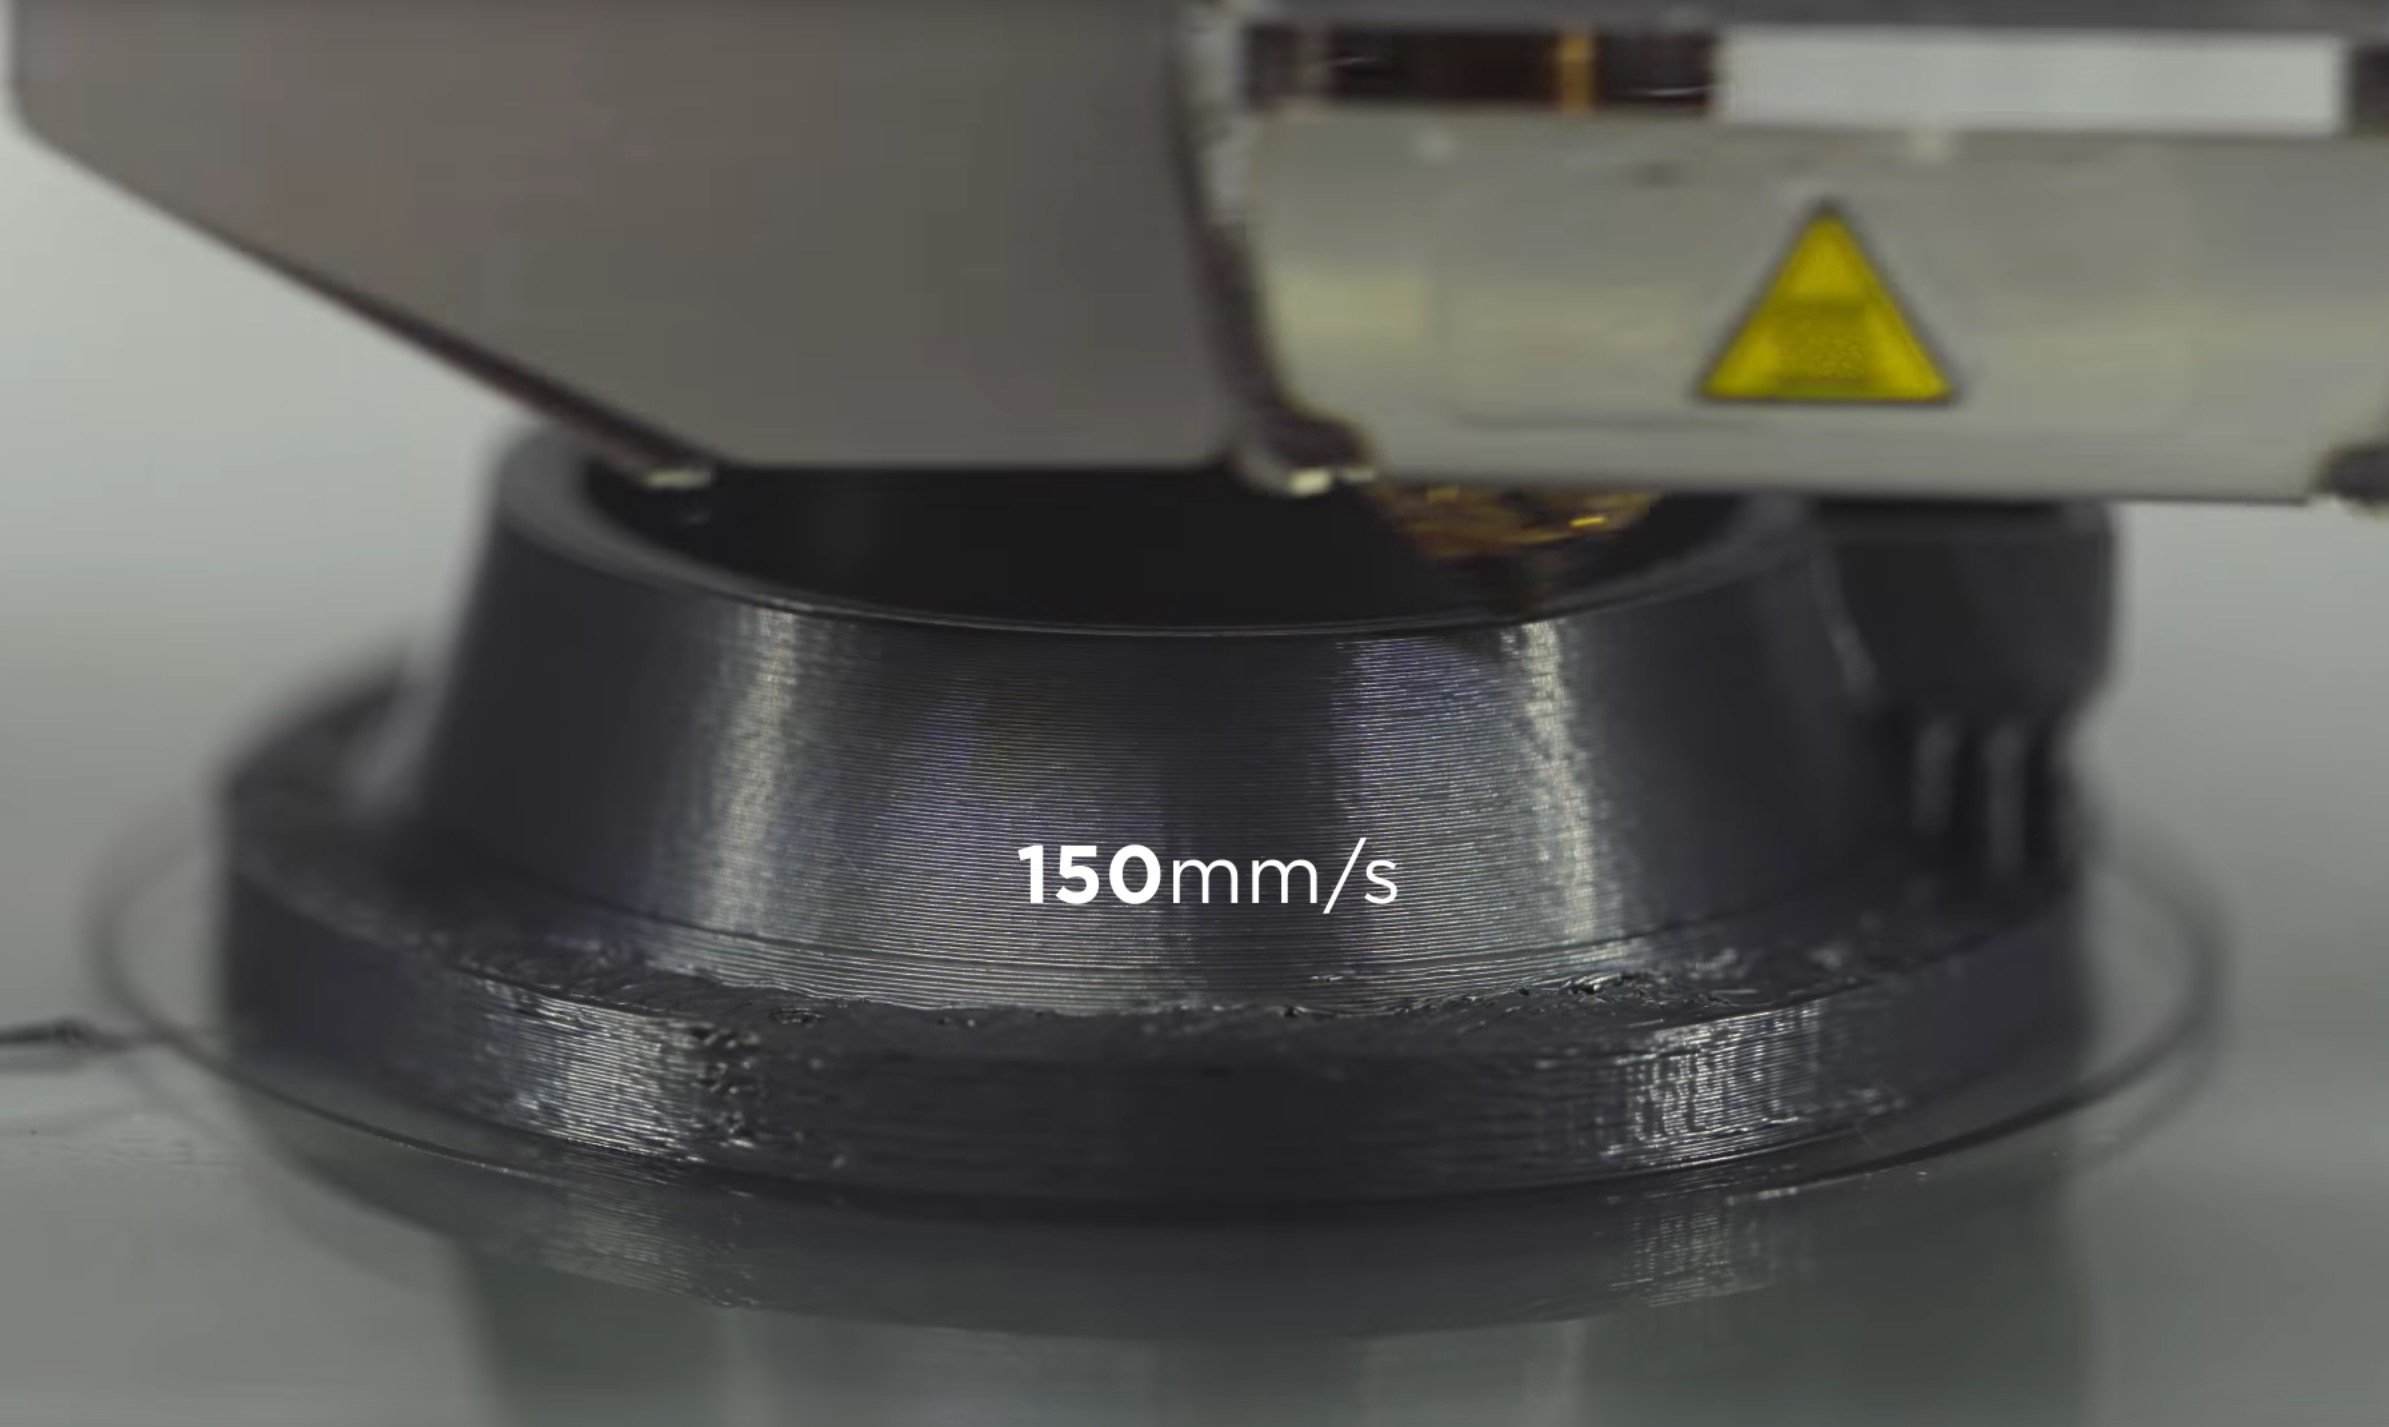  PRO1 filament printing at high speed 